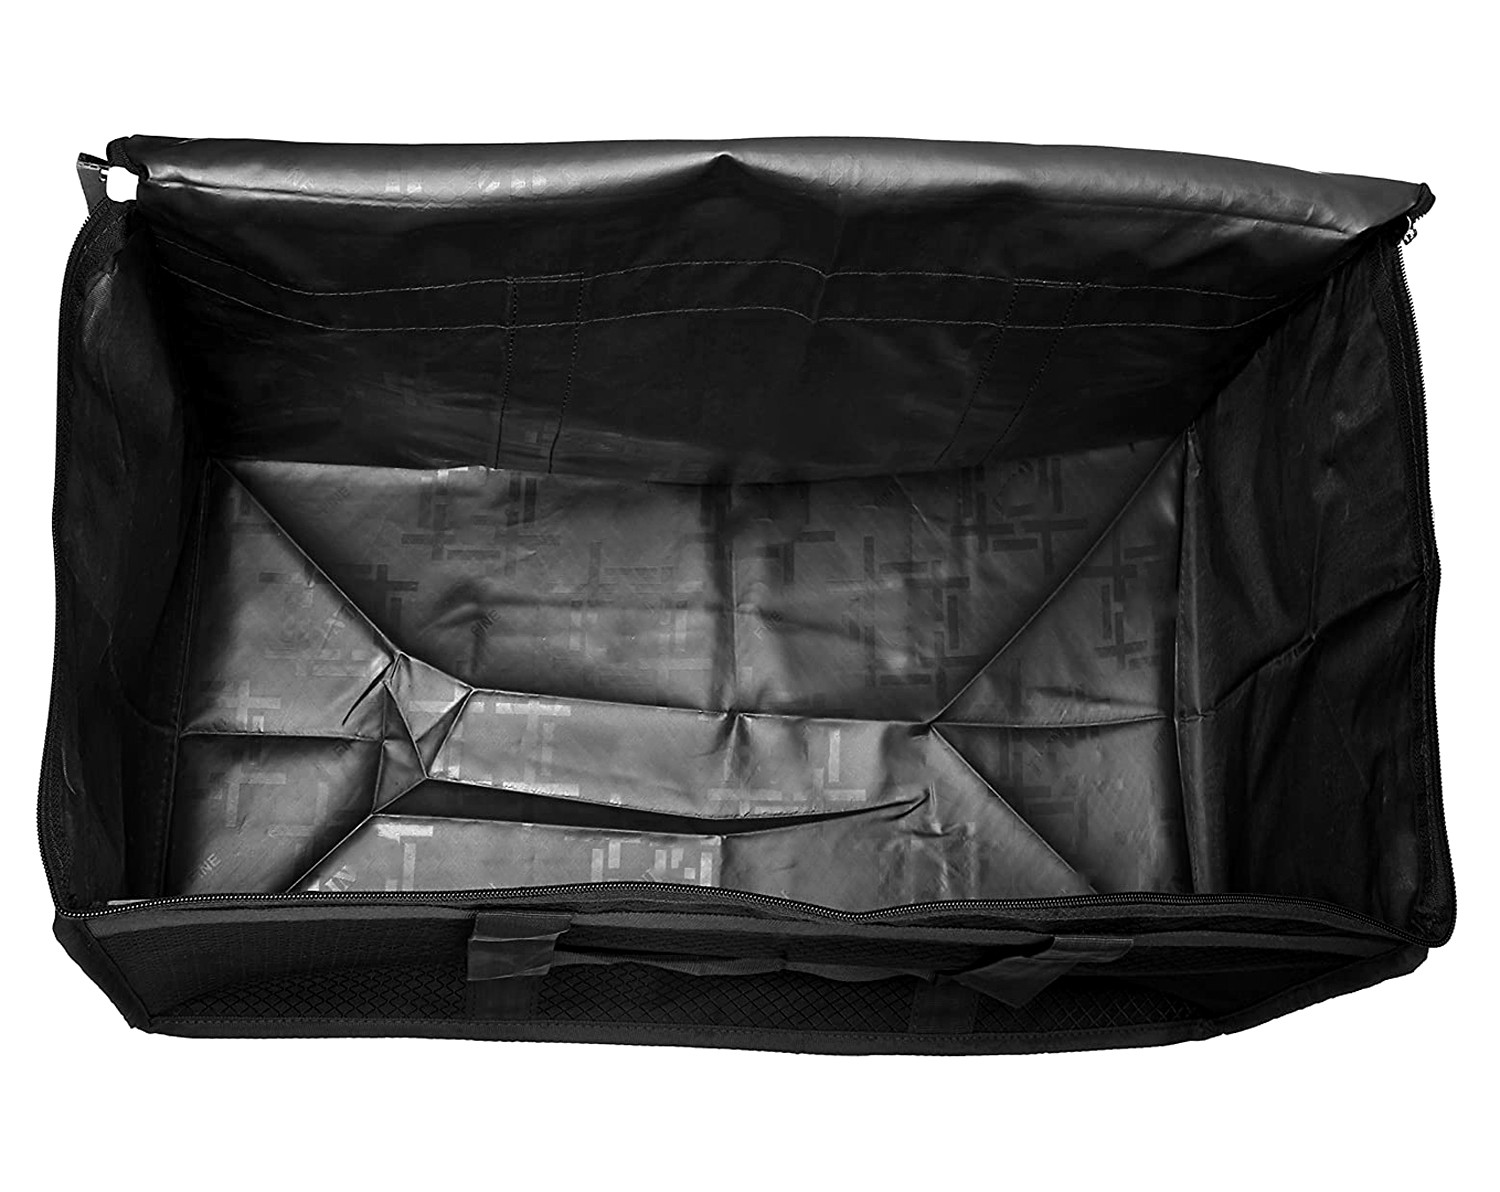 Kuber Industries Rexine Waterproof Large Storage Bag|Cloth Organizer with 2 Side Zipper Closure and Handle (Black)